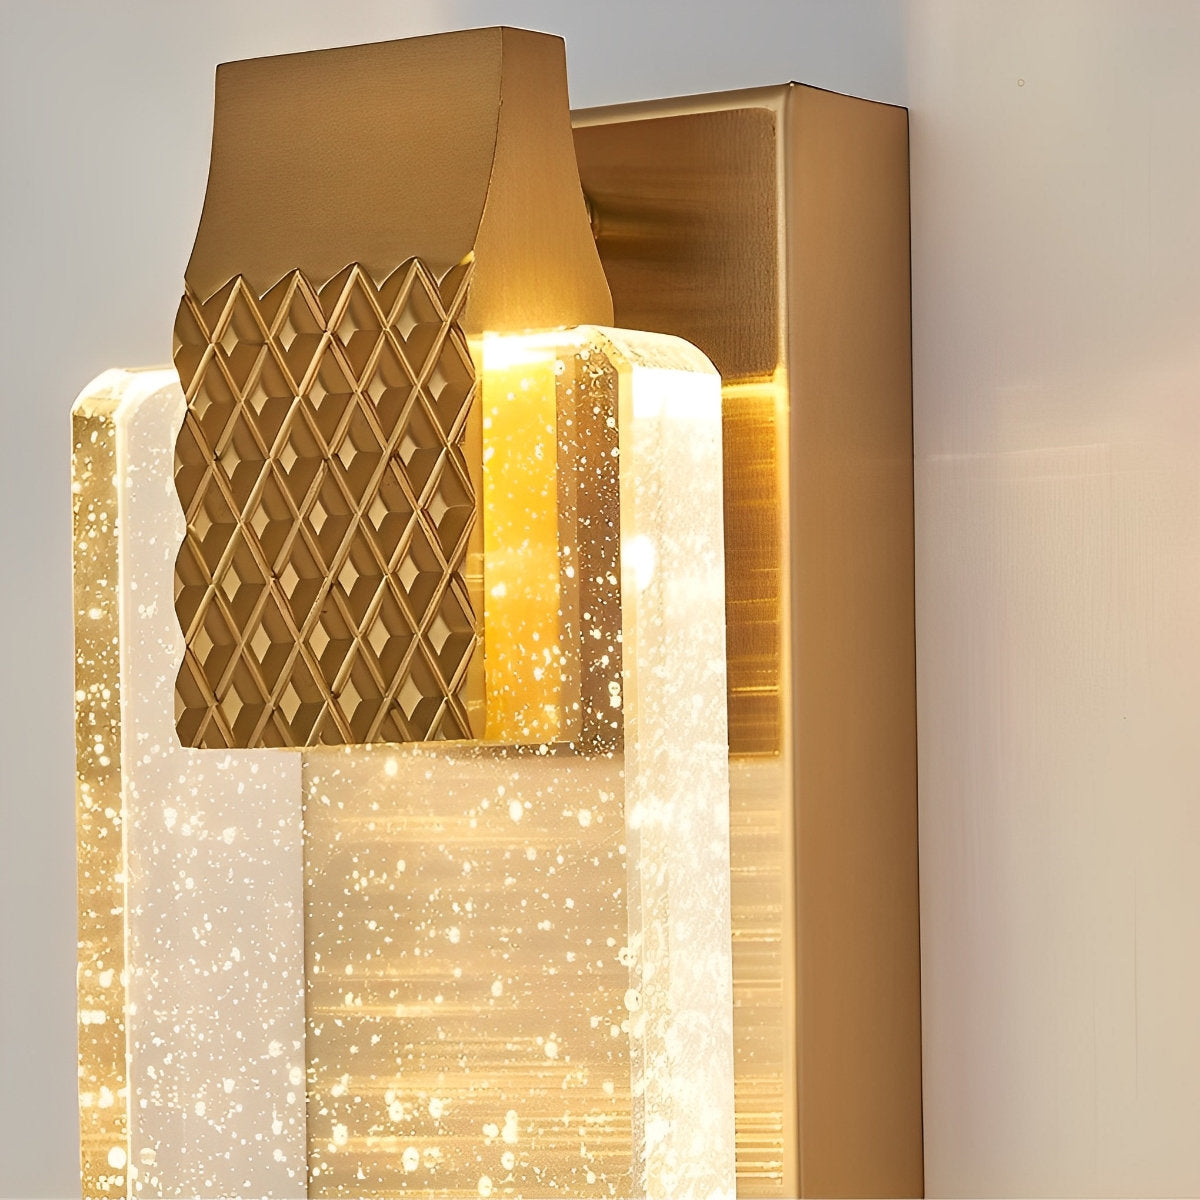 Crystal Bubbles Strip 3-Step Dimming Post-Modern LED Wall Light Fixture Lamp Sconce Lamp Lighting - Flyachilles